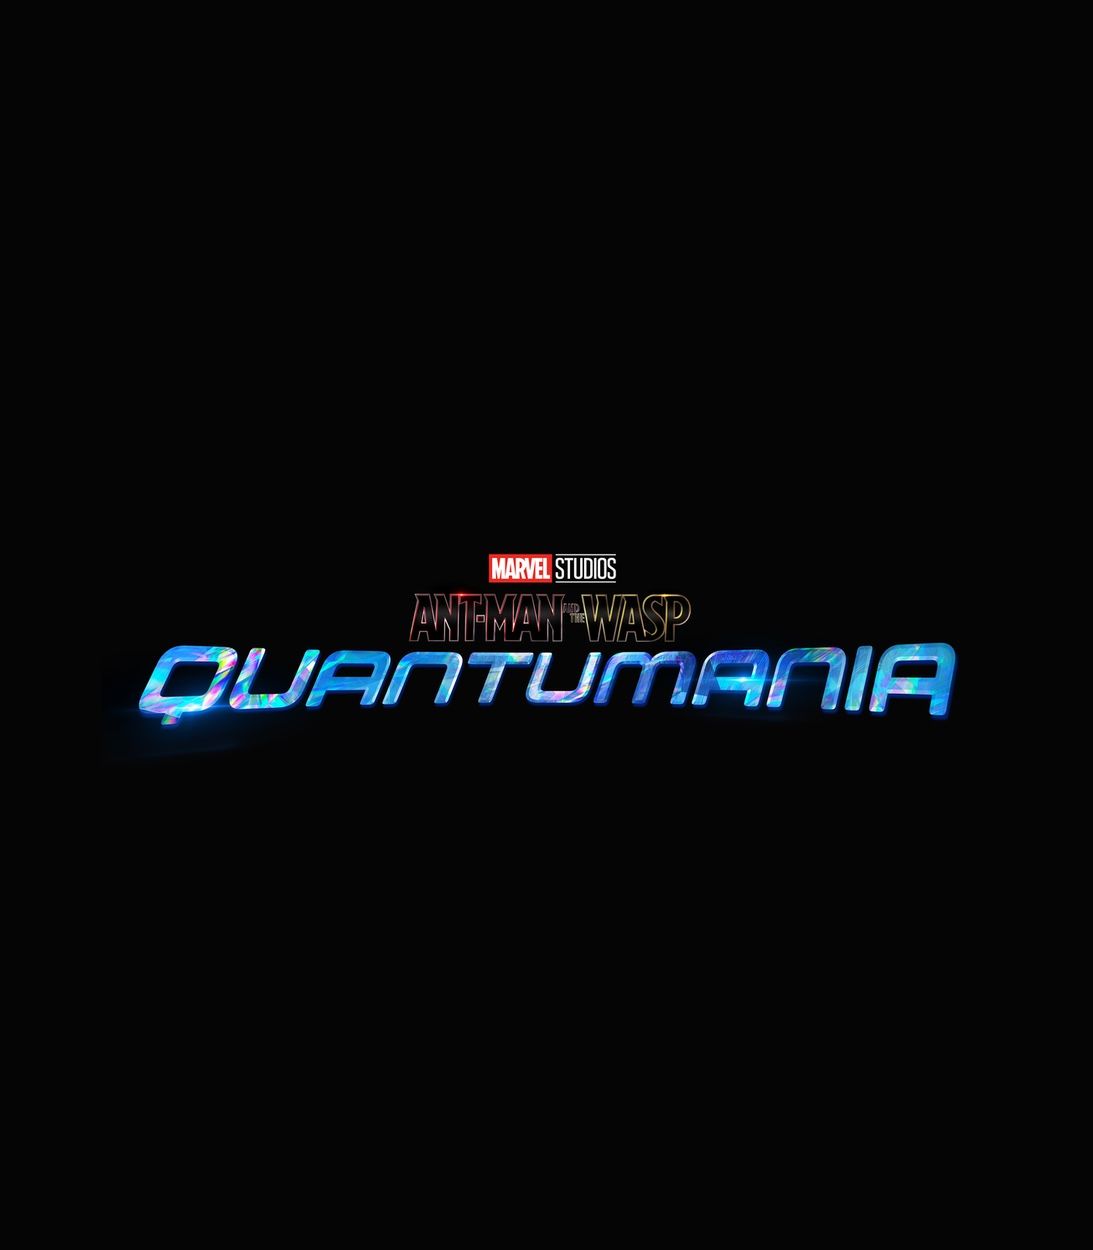 Ant-Man and the Wasp Quantumania movie logo